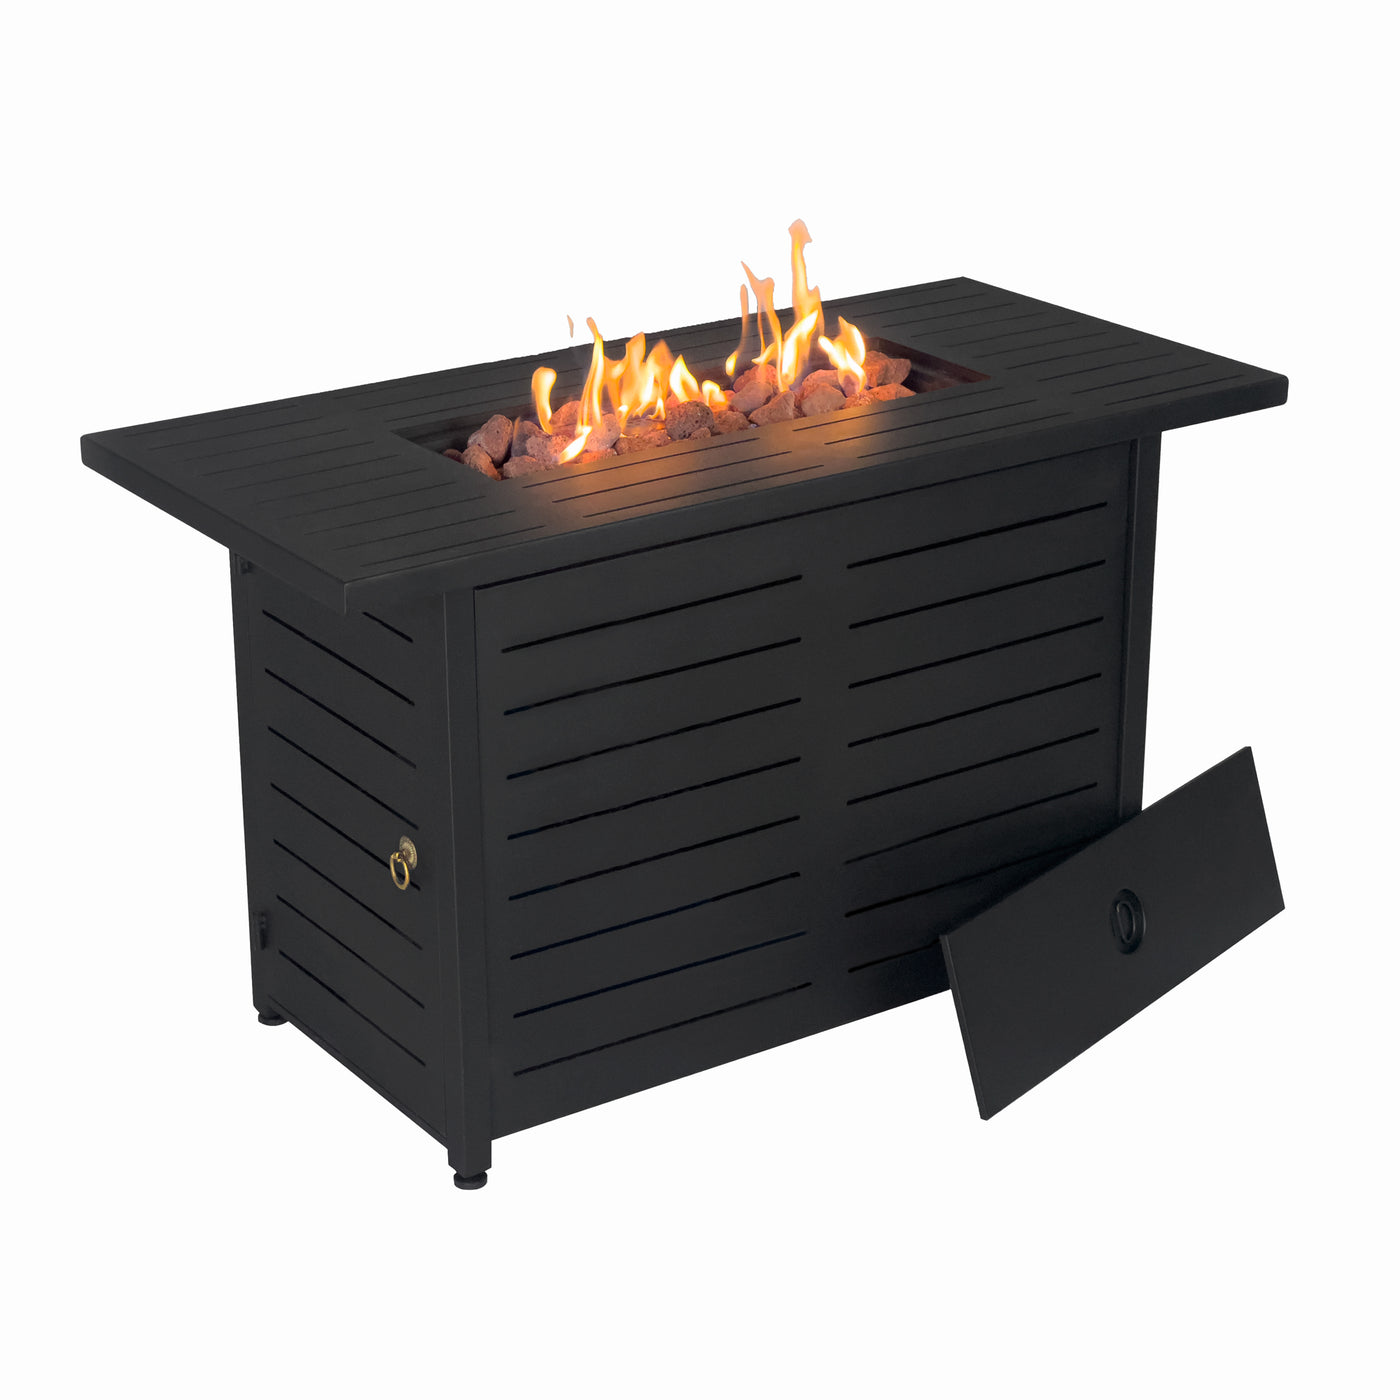 Ore 42" Outdoor Fire Pit Table for Patio